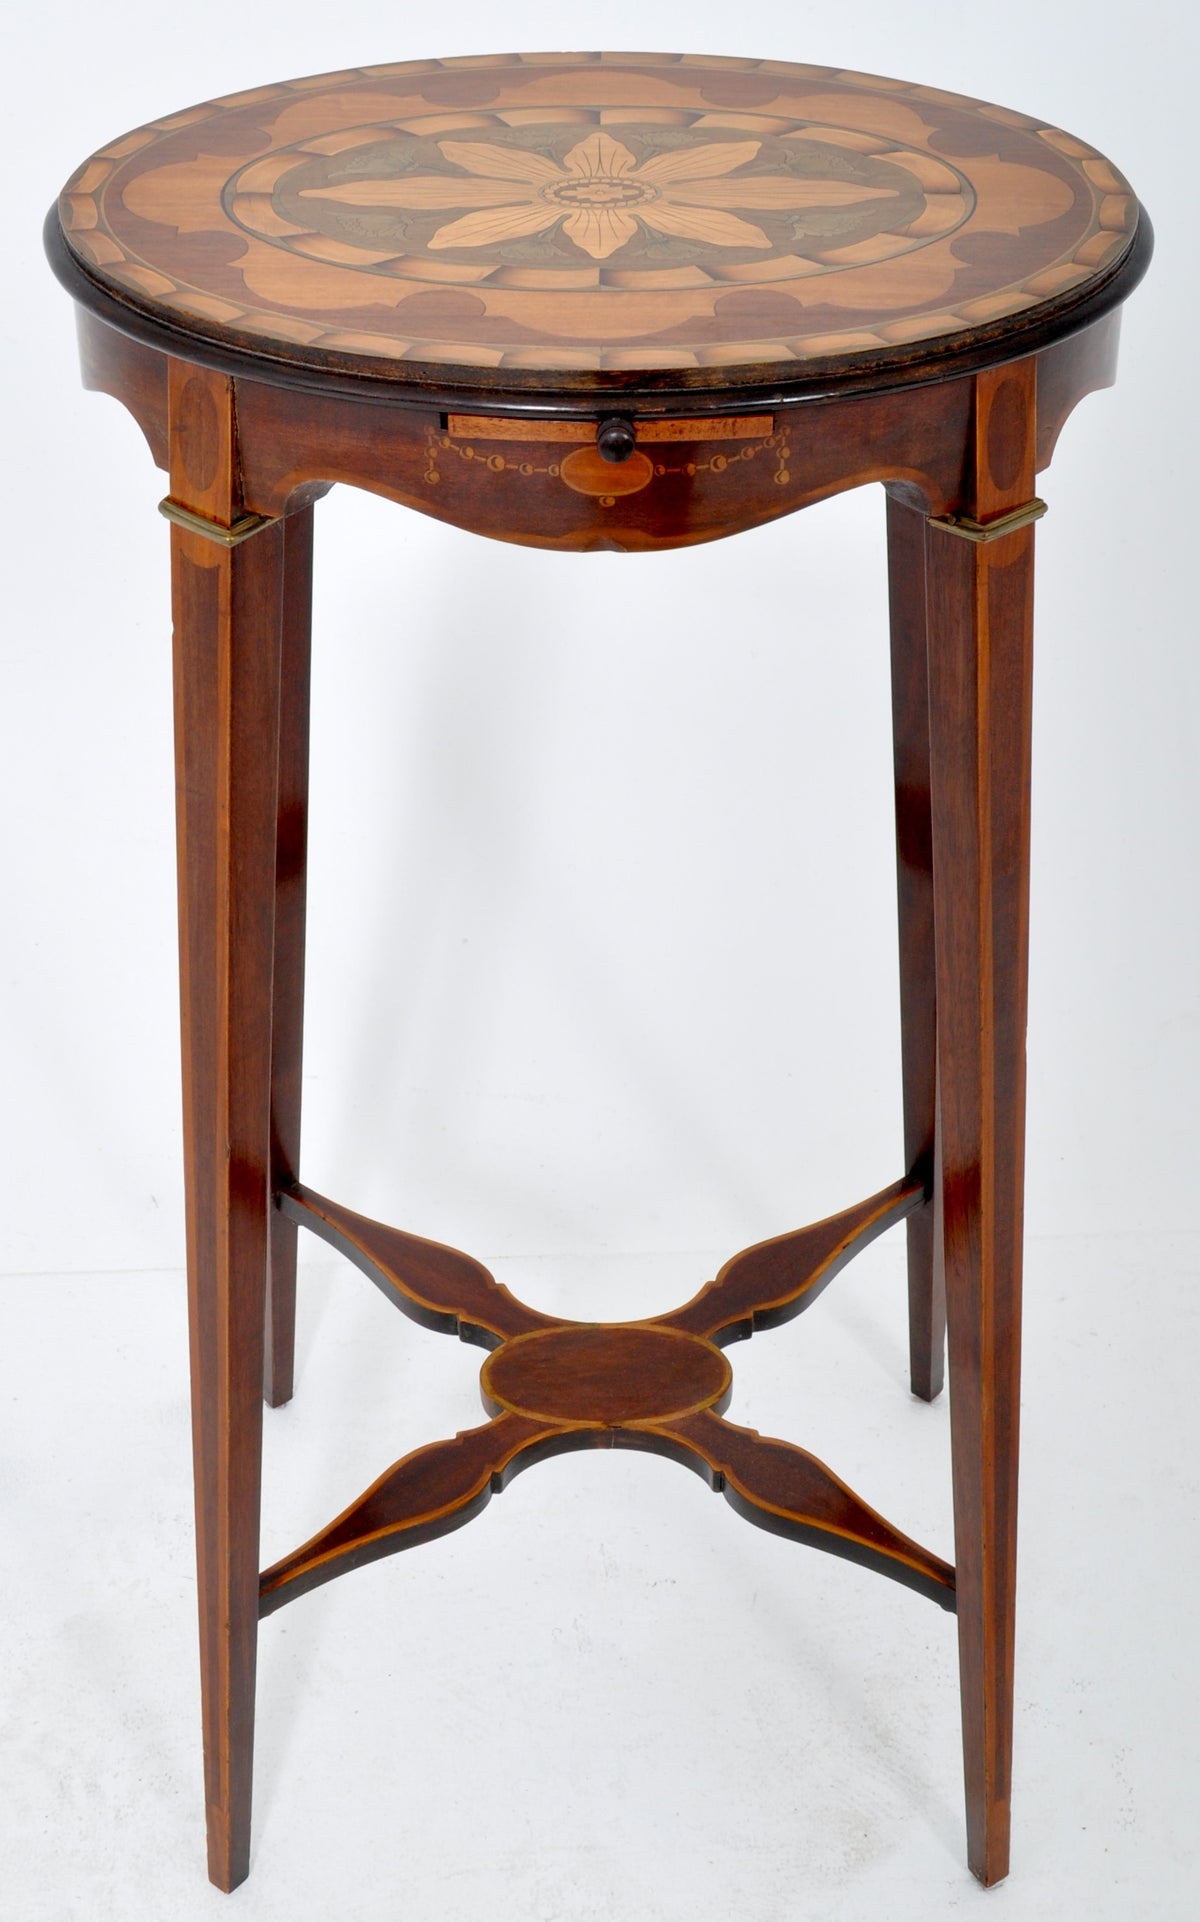 Antique Edwardian Sheraton Inlaid Marquetry Table/Wine Stand, Circa 1900